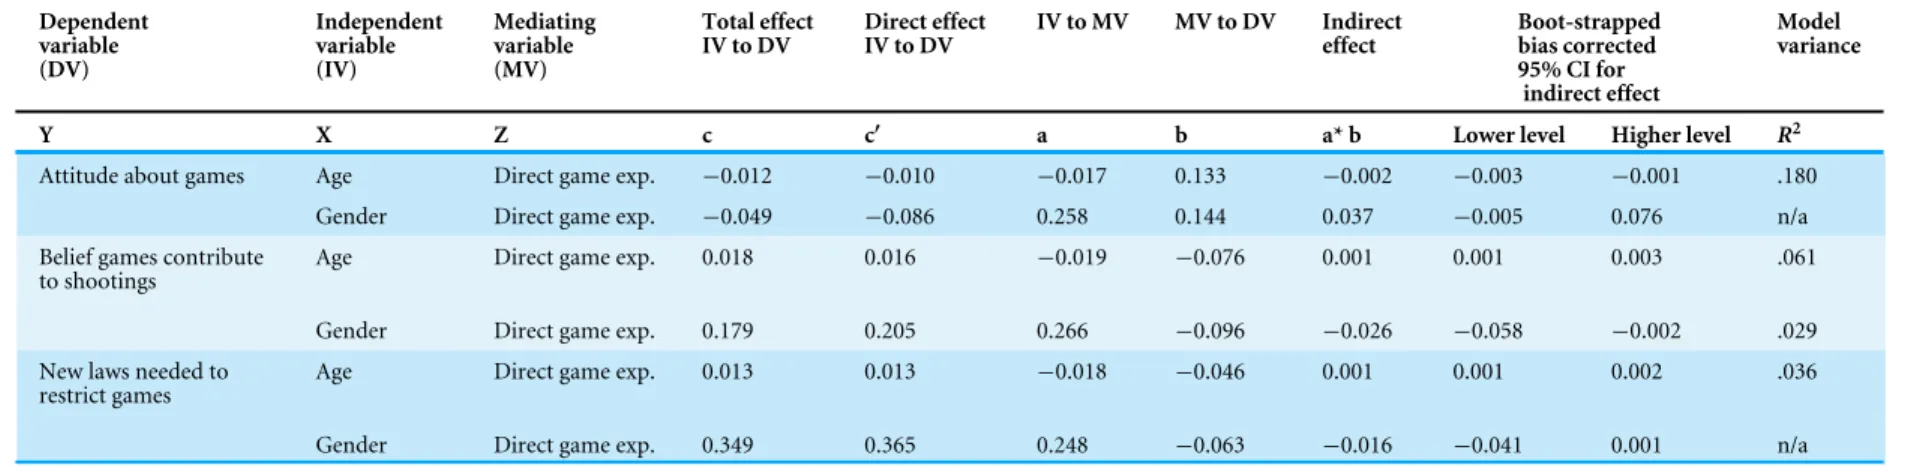 Table 5 Study 2 indirect effects analyses examining direct game experience. Dependent variable (DV) Independentvariable(IV) Mediatingvariable(MV) Total effectIV to DV Direct effectIV to DV IV to MV MV to DV Indirecteffect Boot-strappedbias corrected95% CI 